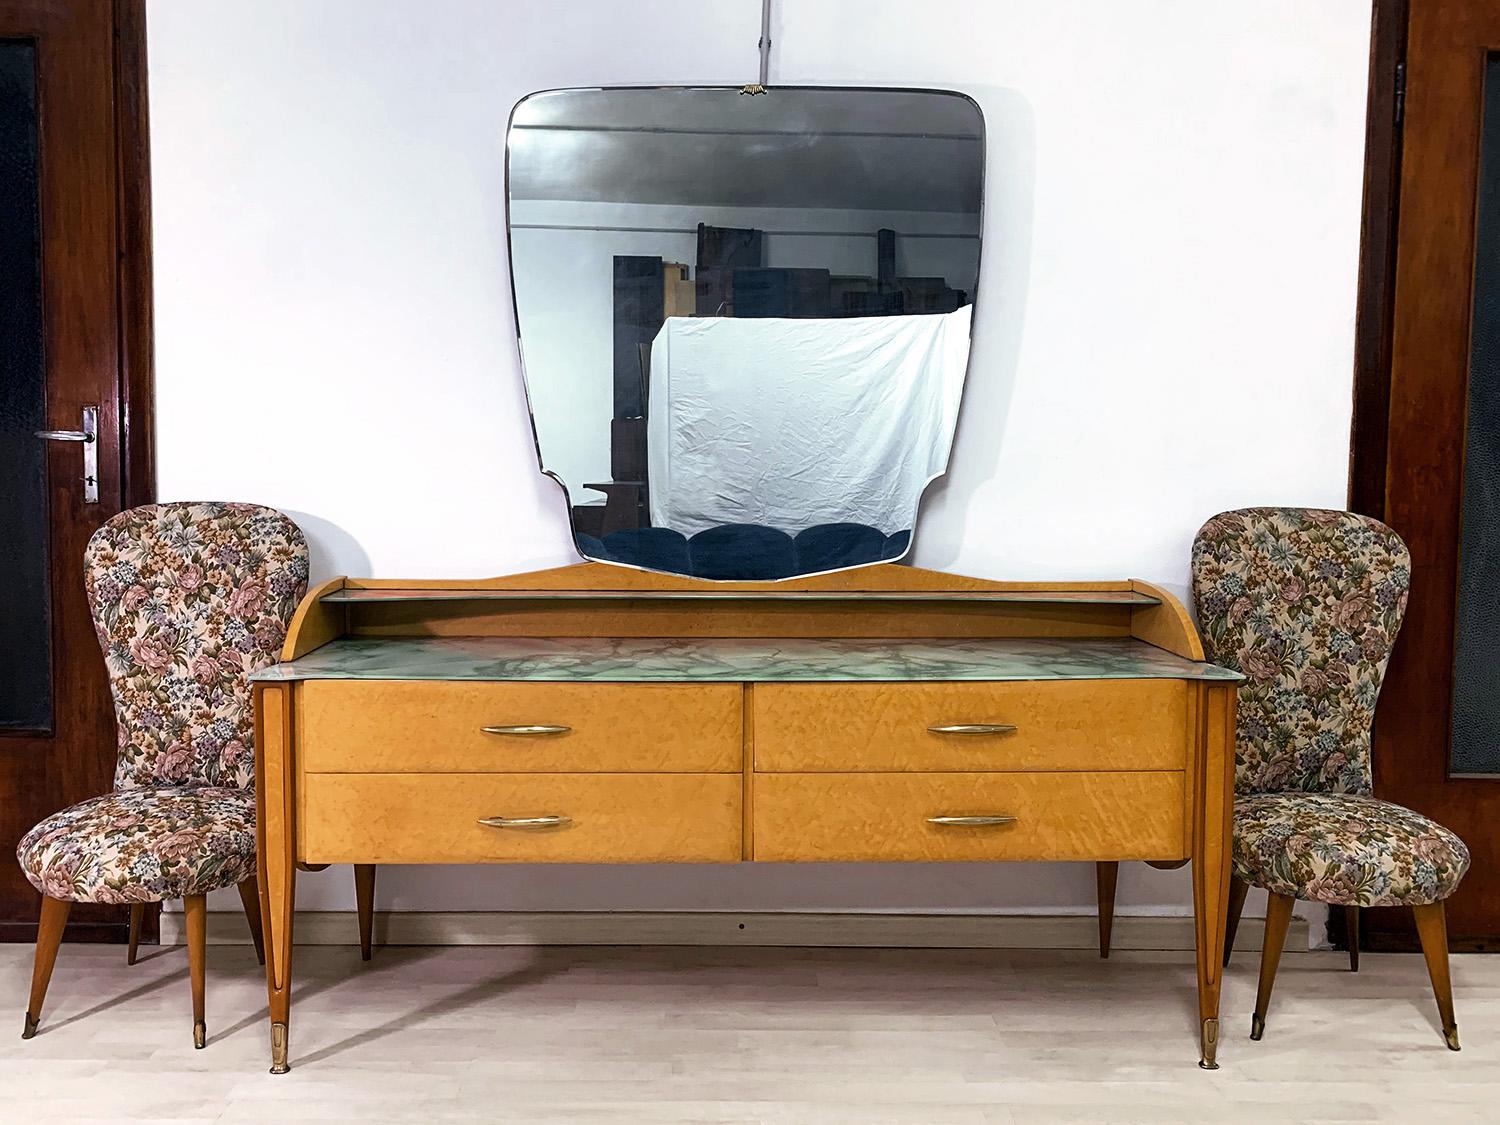 Stylish Italian vanity dresser with mirror of the 1950s, Gio Ponti style. 
Its maple structure has an original sculptural shape design sourmounted by a vertical wall mirror, and is equipped with four drawers and finished with brass feet.
Both two